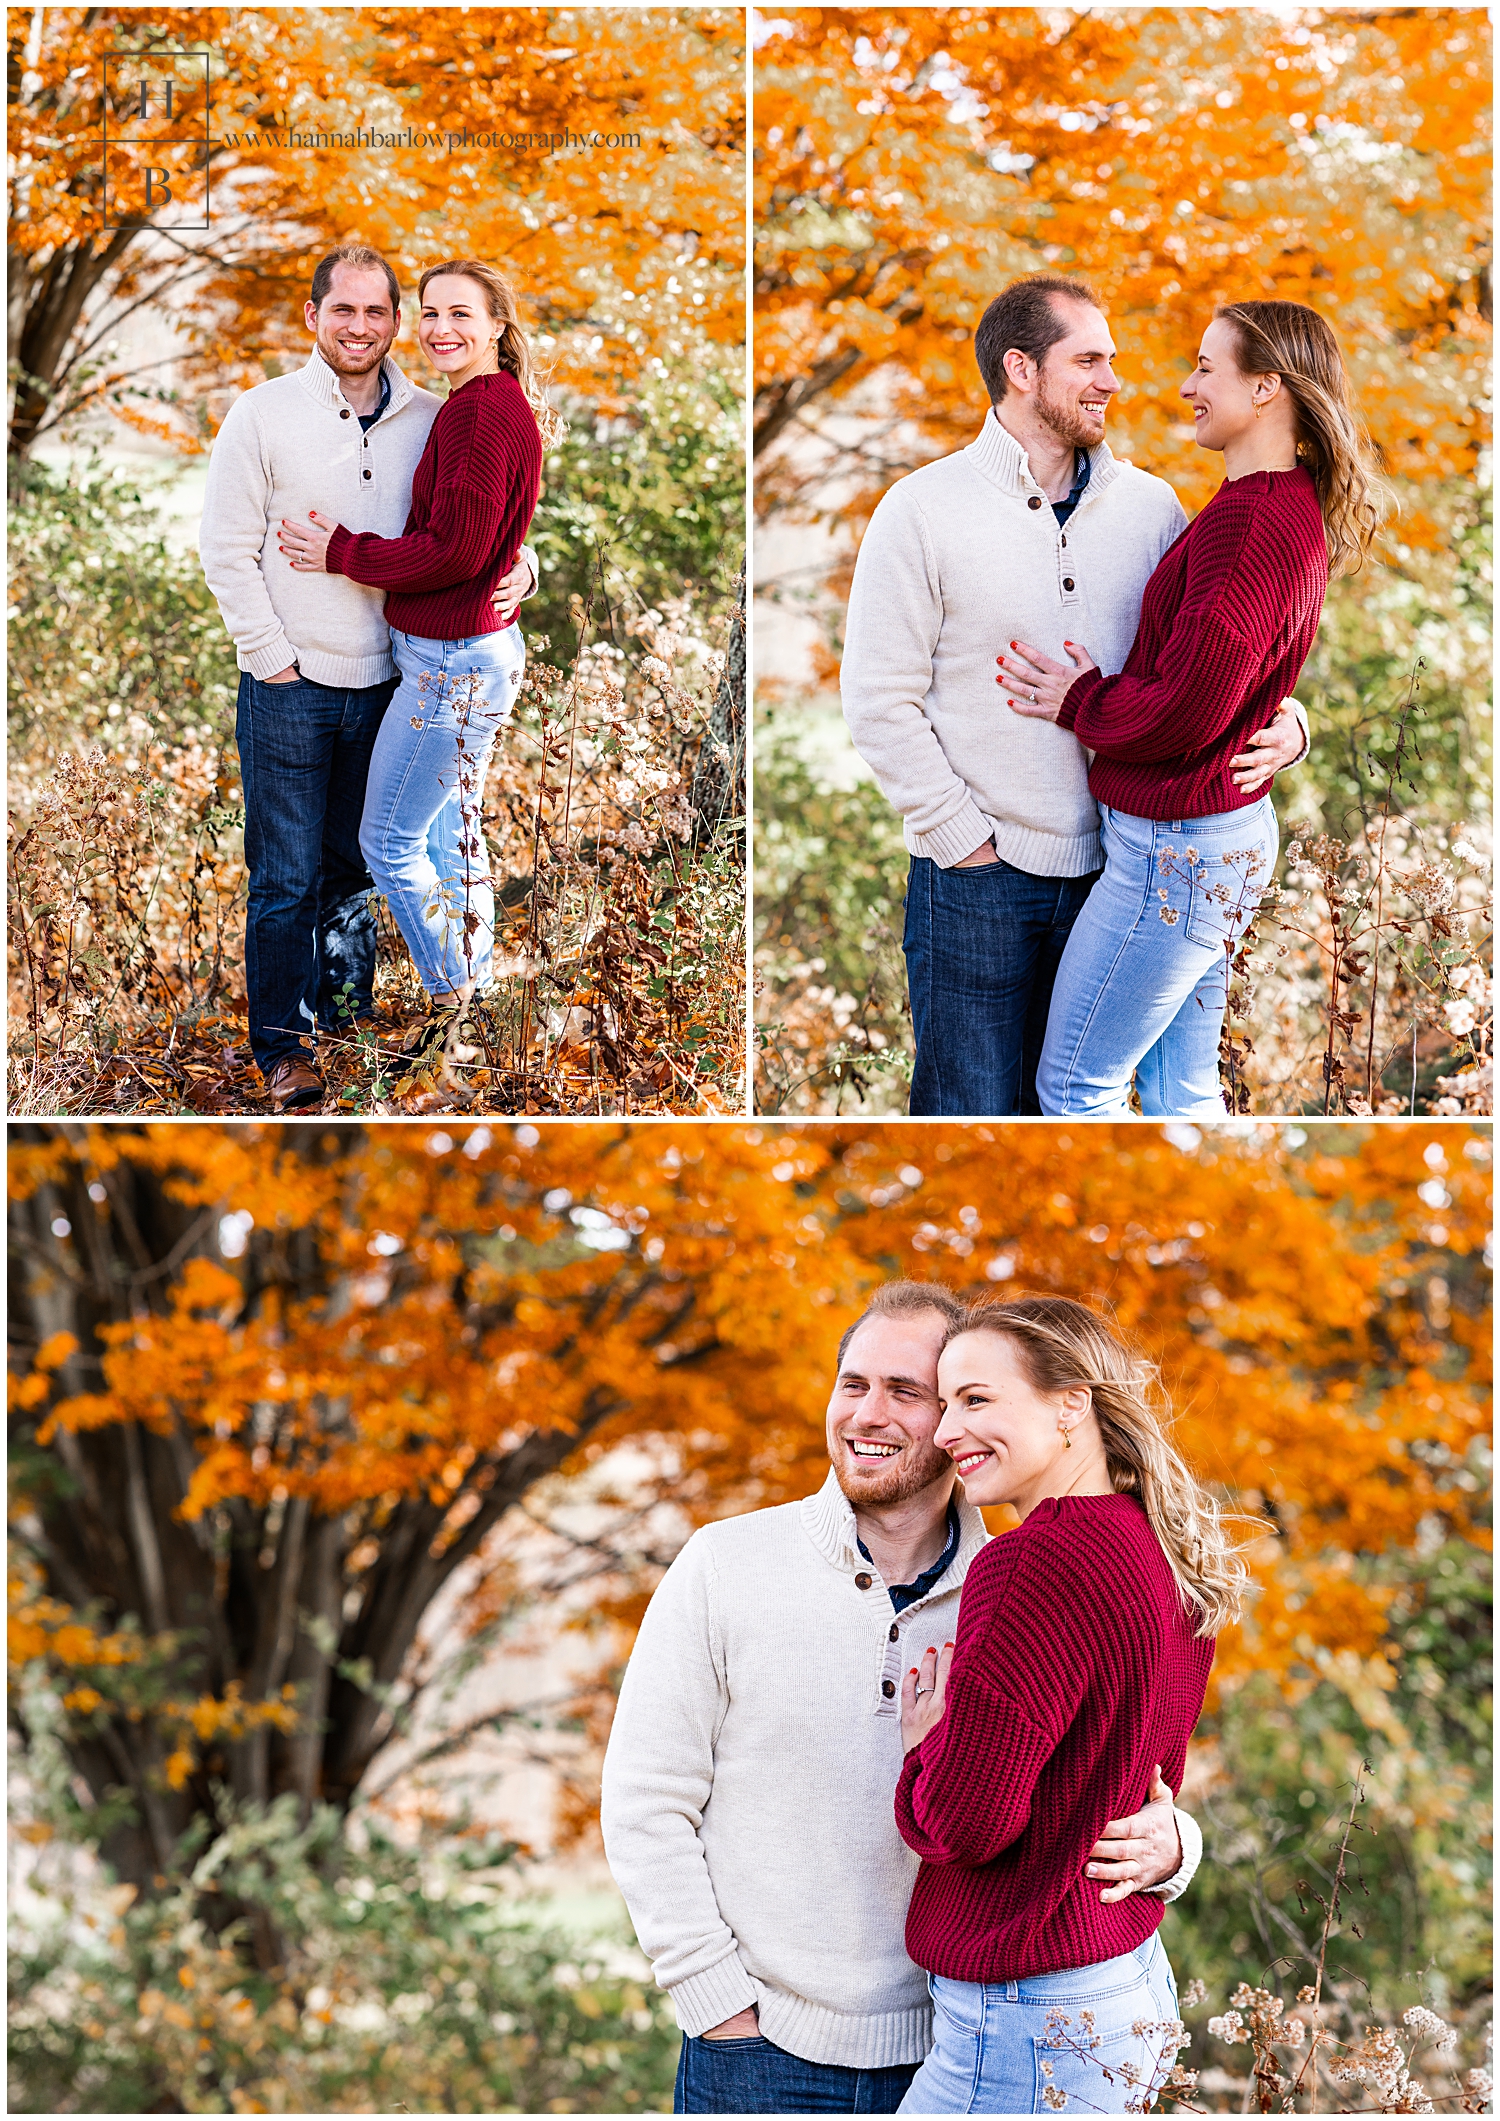 Couple embraces in fall foliage for engagement photos